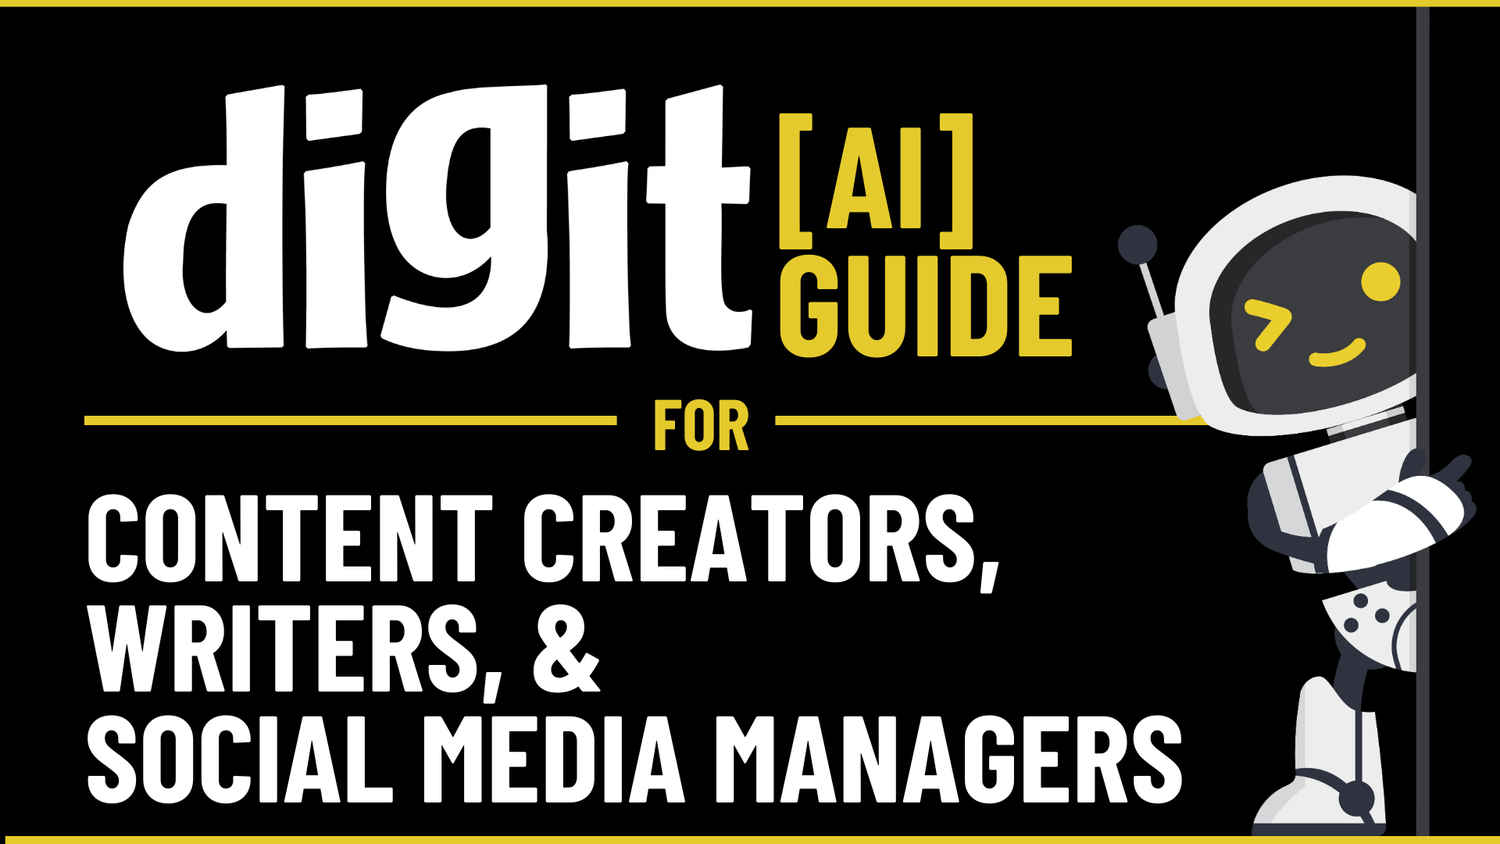 Digit AI Guide: Find the best AI apps for social media managers, creative writers, and content creators